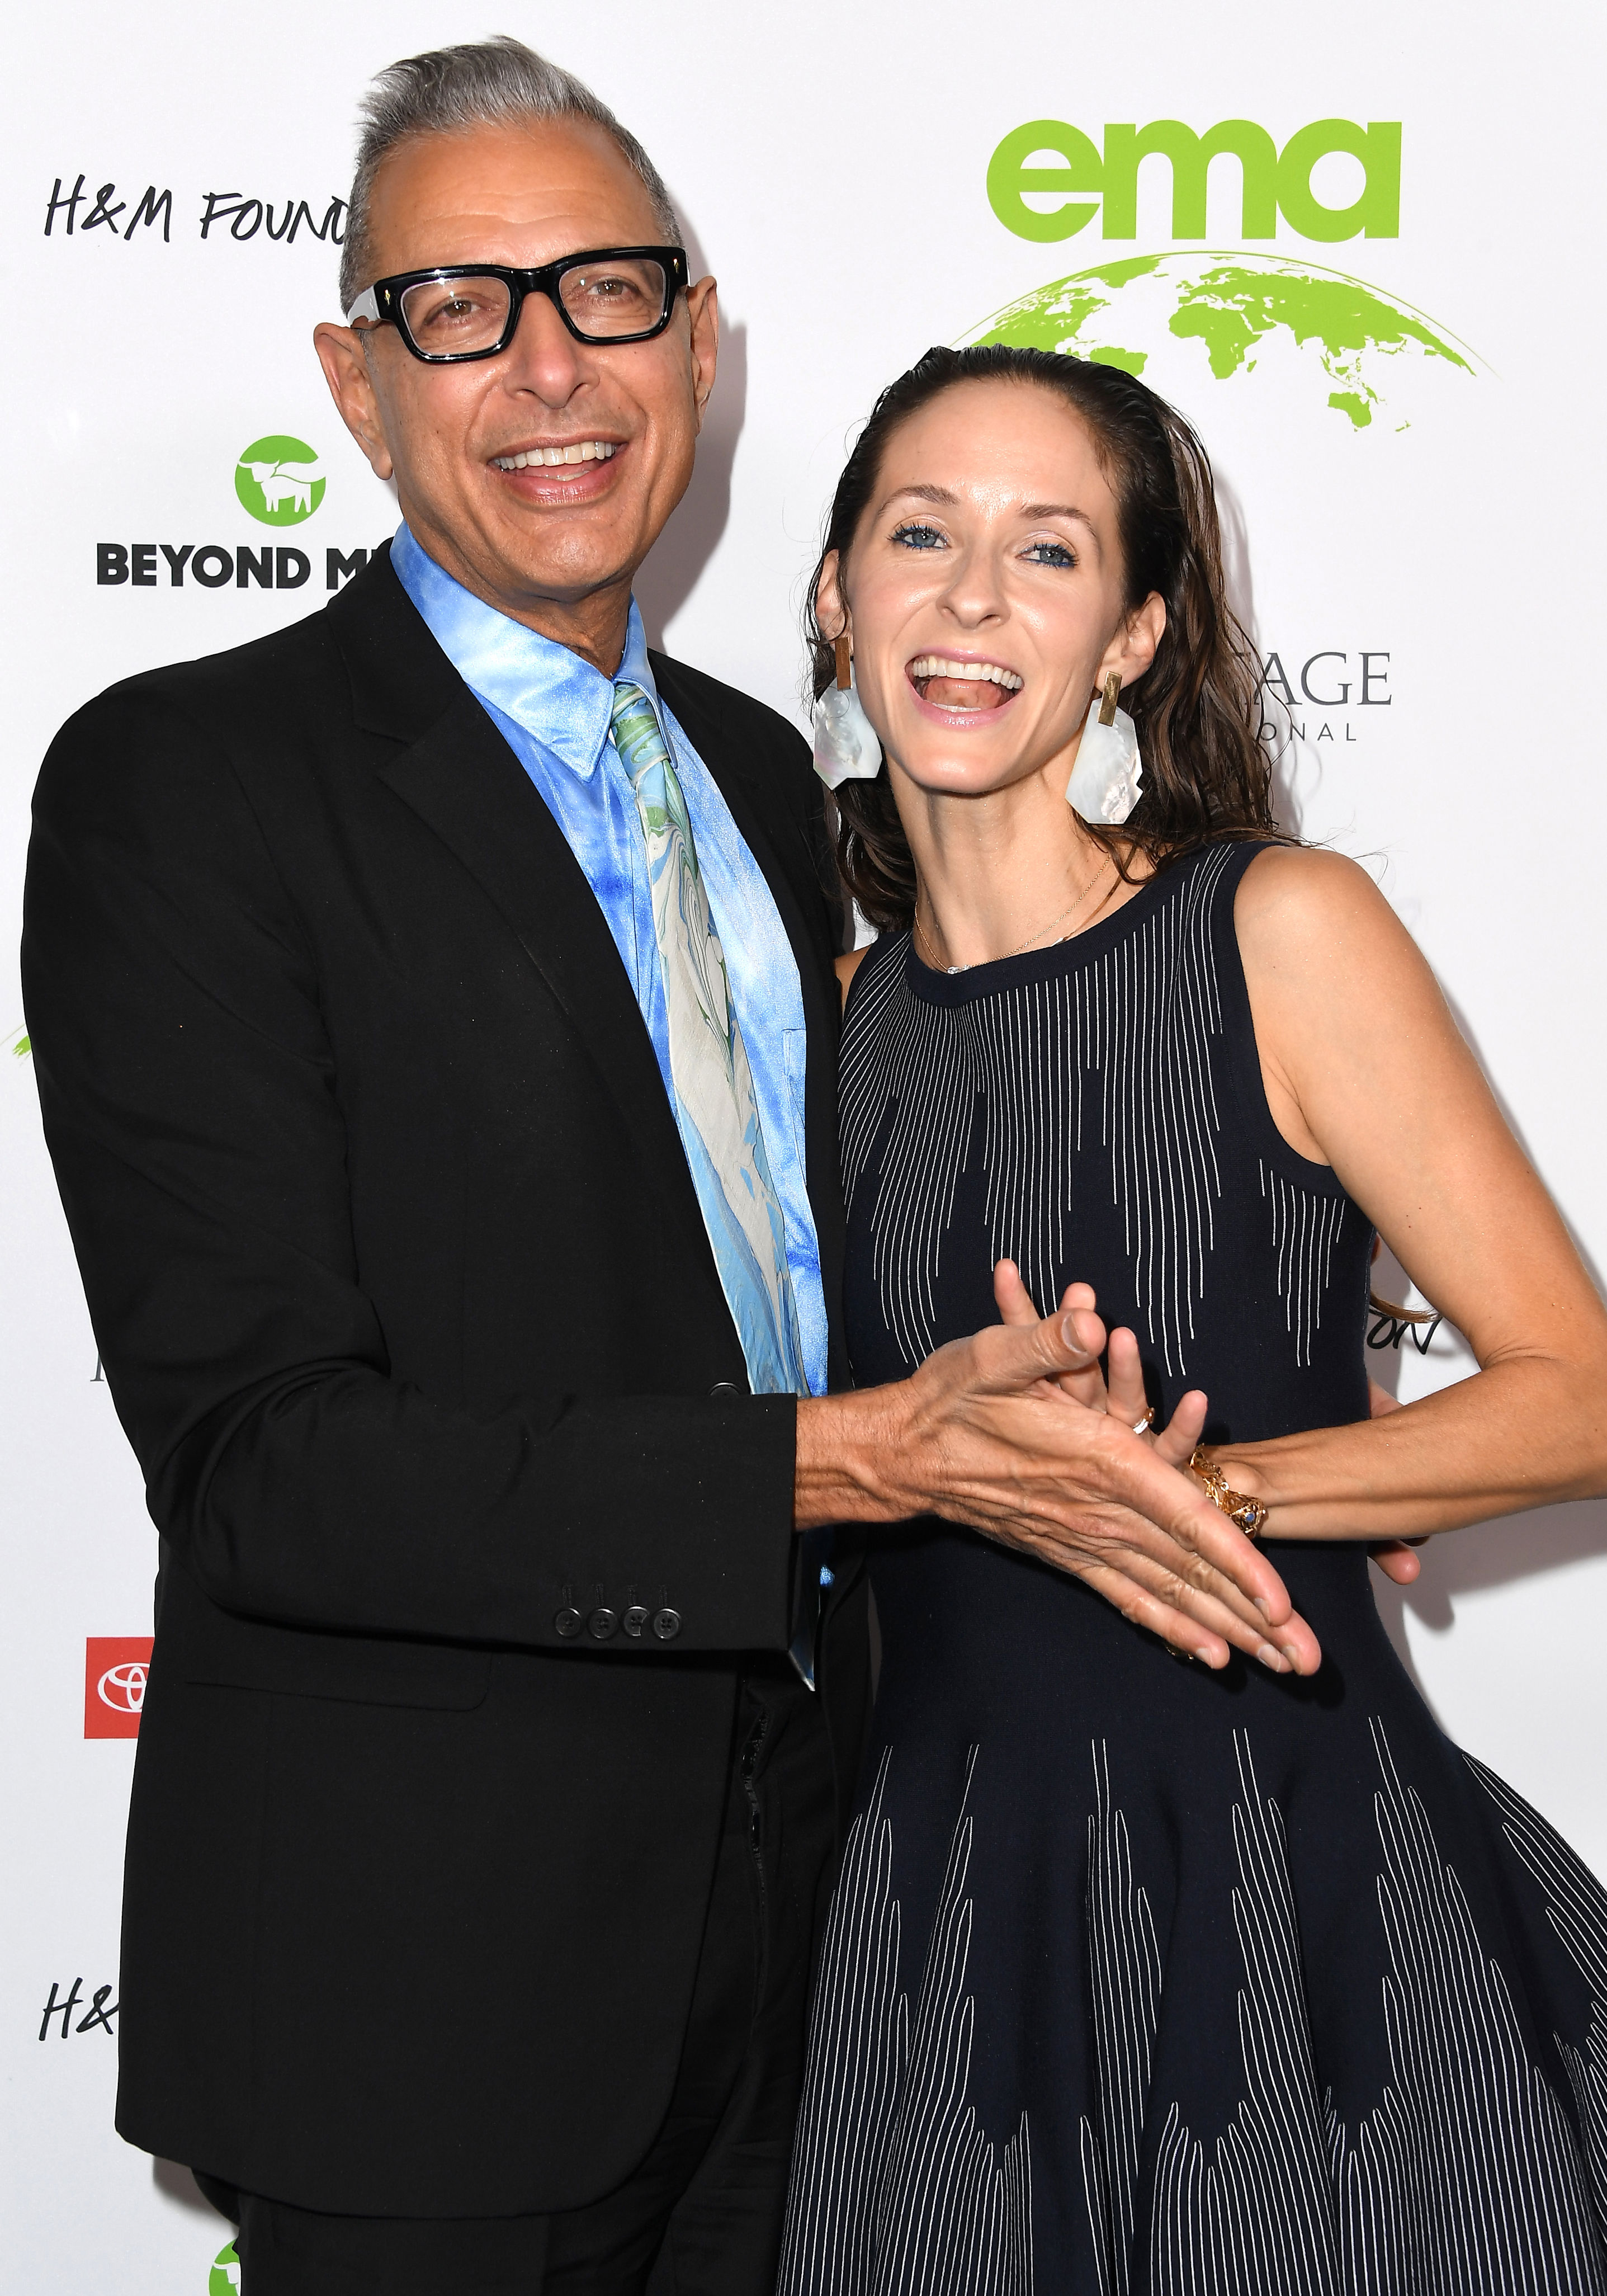 <p>Actor Jeff Goldblum was 62 when he married retired Olympic rhythmic gymnast Emilie Livingston, who was a 31-year-old bride. The couple, who have three decades between them, went on to welcome two sons. </p>